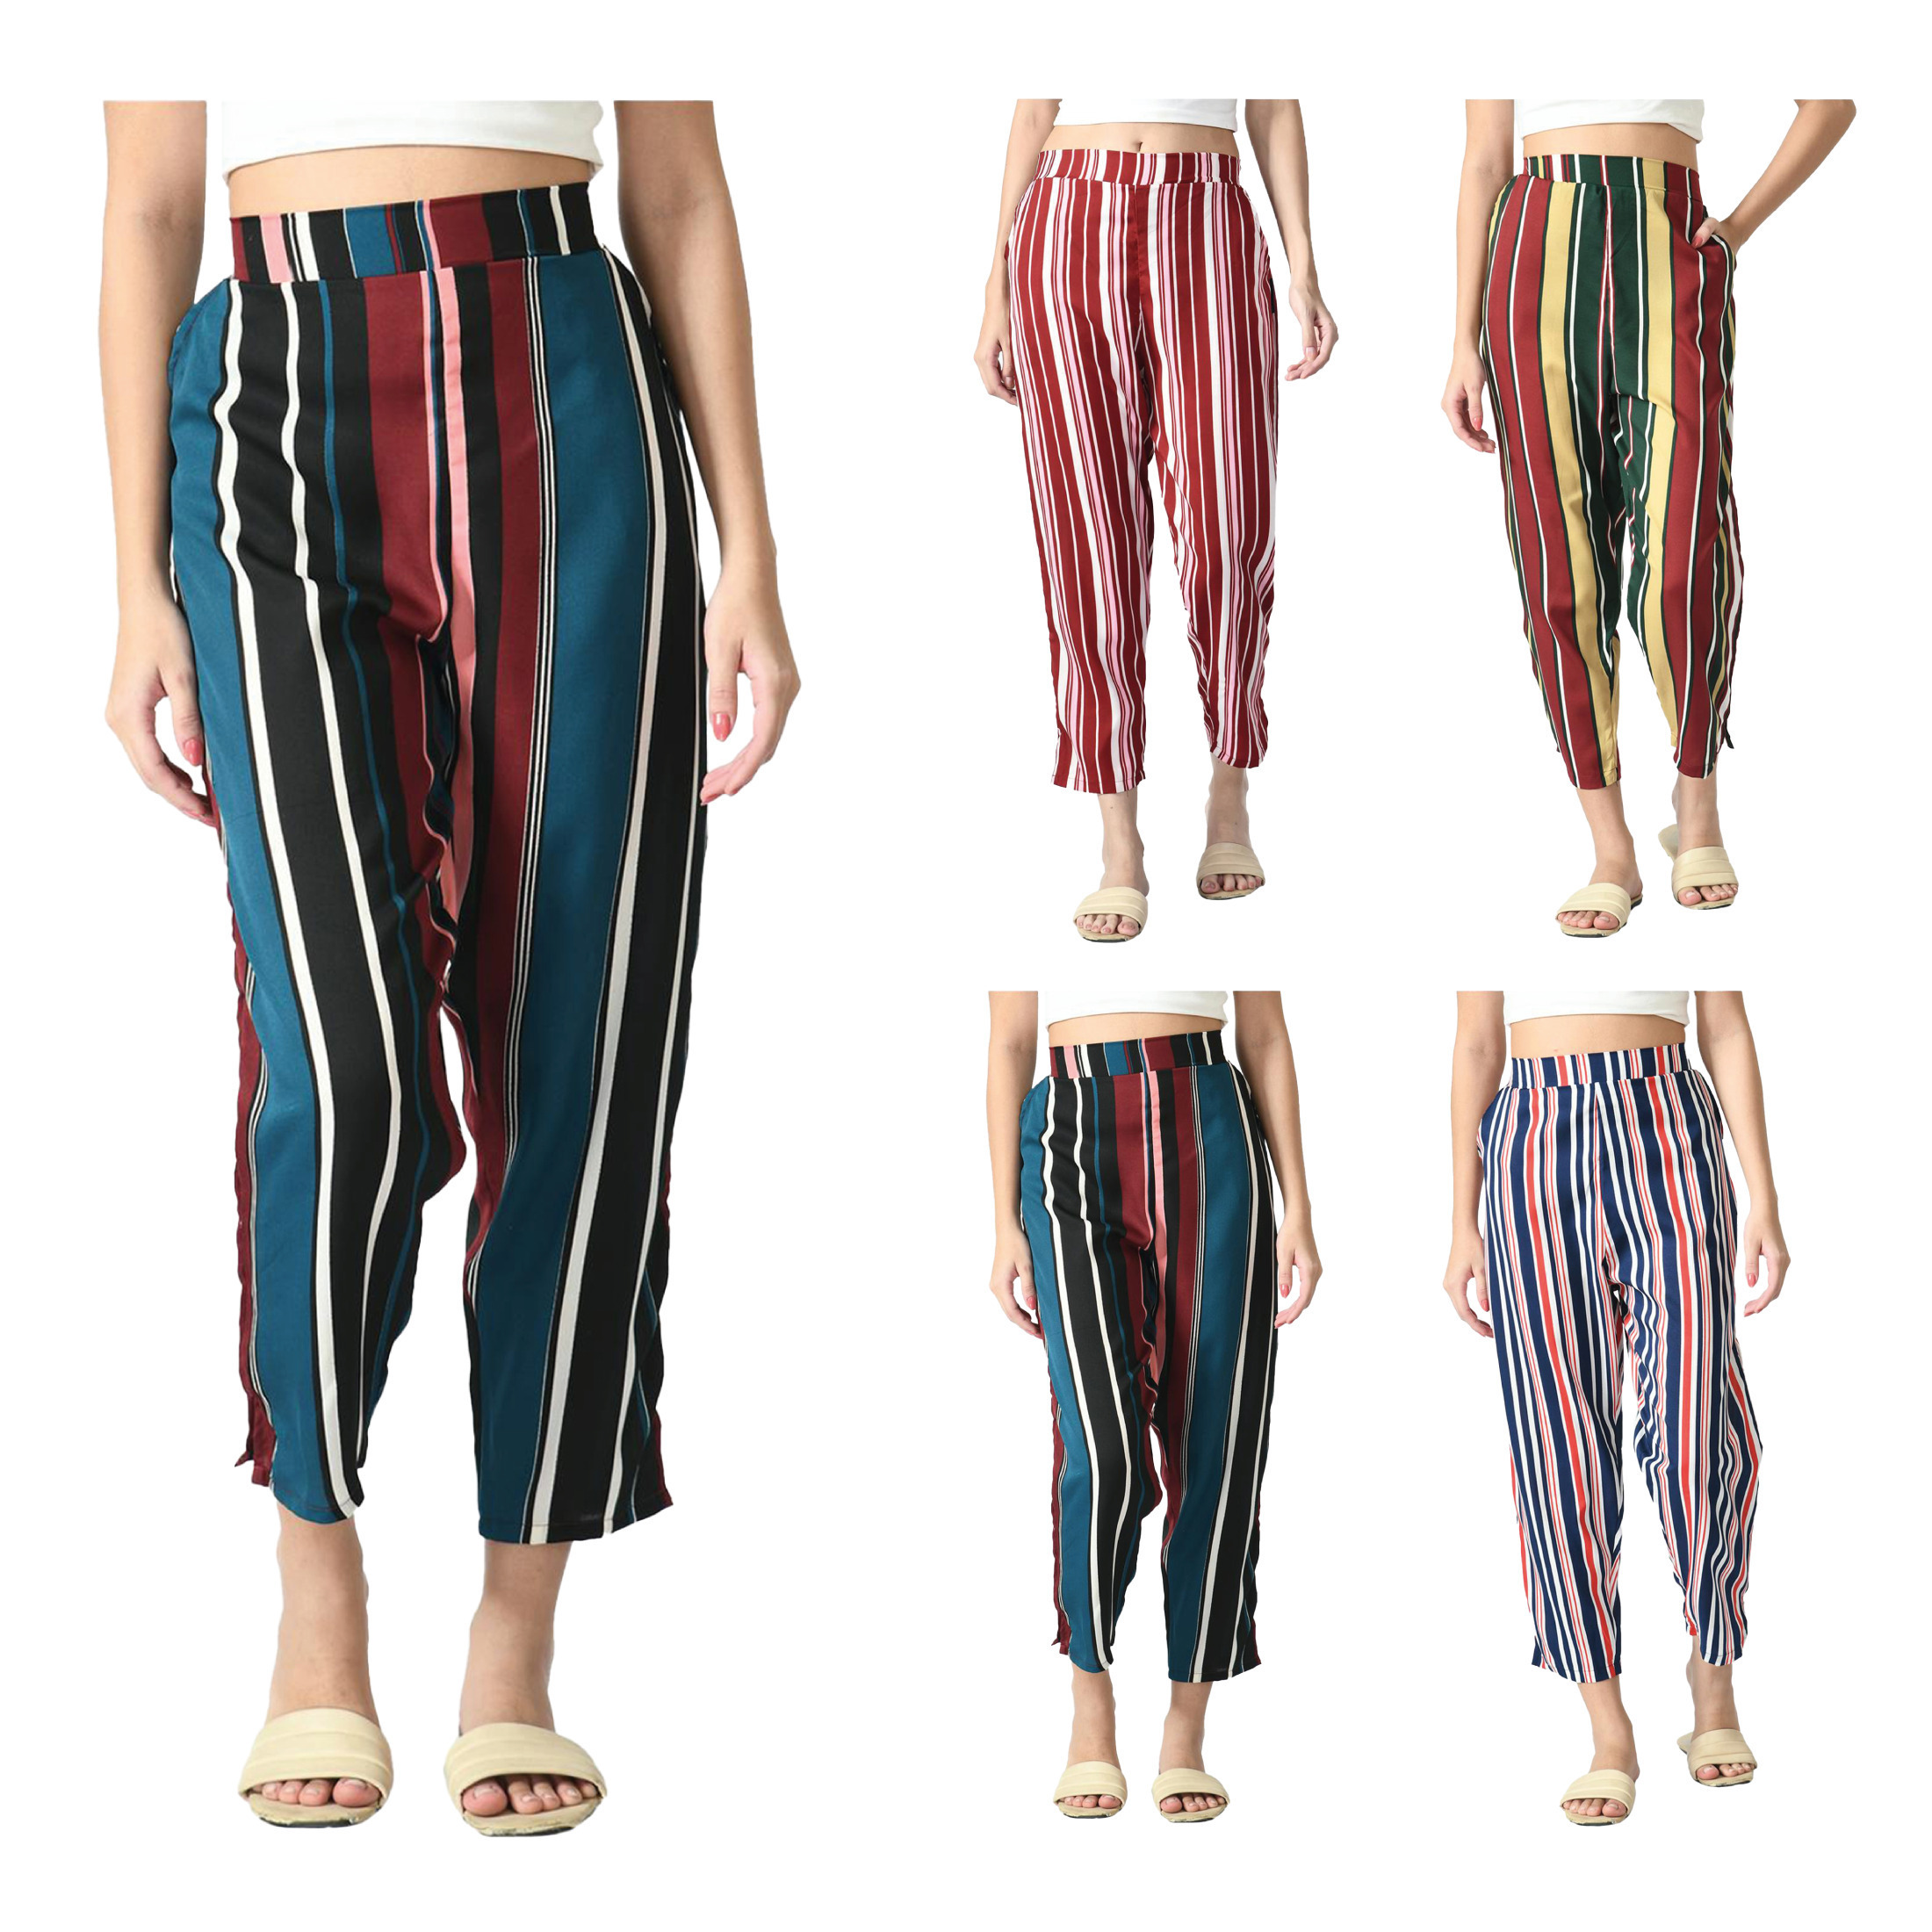 3-Pack Women's Cotton Palazzo Pants Striped Print Soft & Comfortable Western Style Regular Fit Ladies Trouser - L